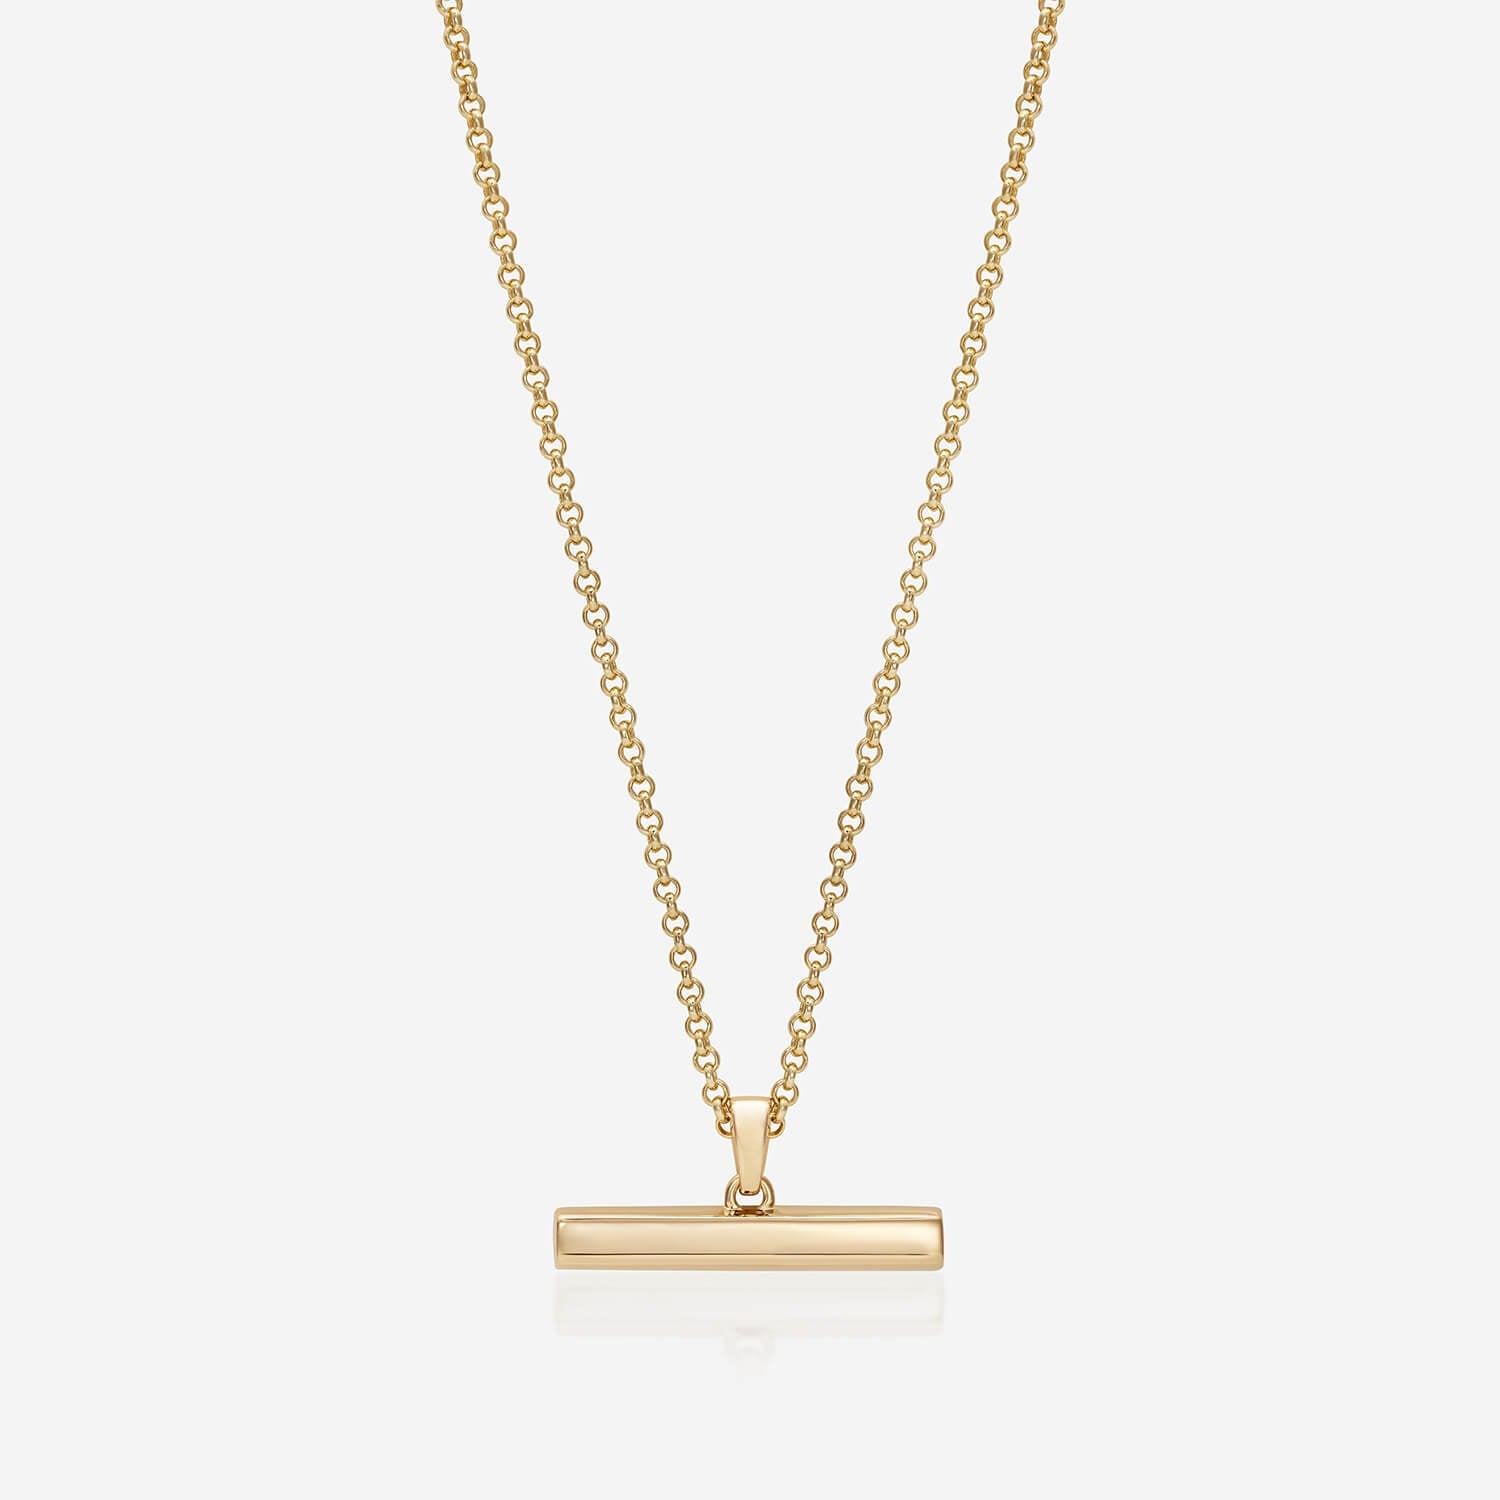 886 Royal Mint Necklaces 886 Pavé T-Bar with Chain in 18ct Yellow Gold